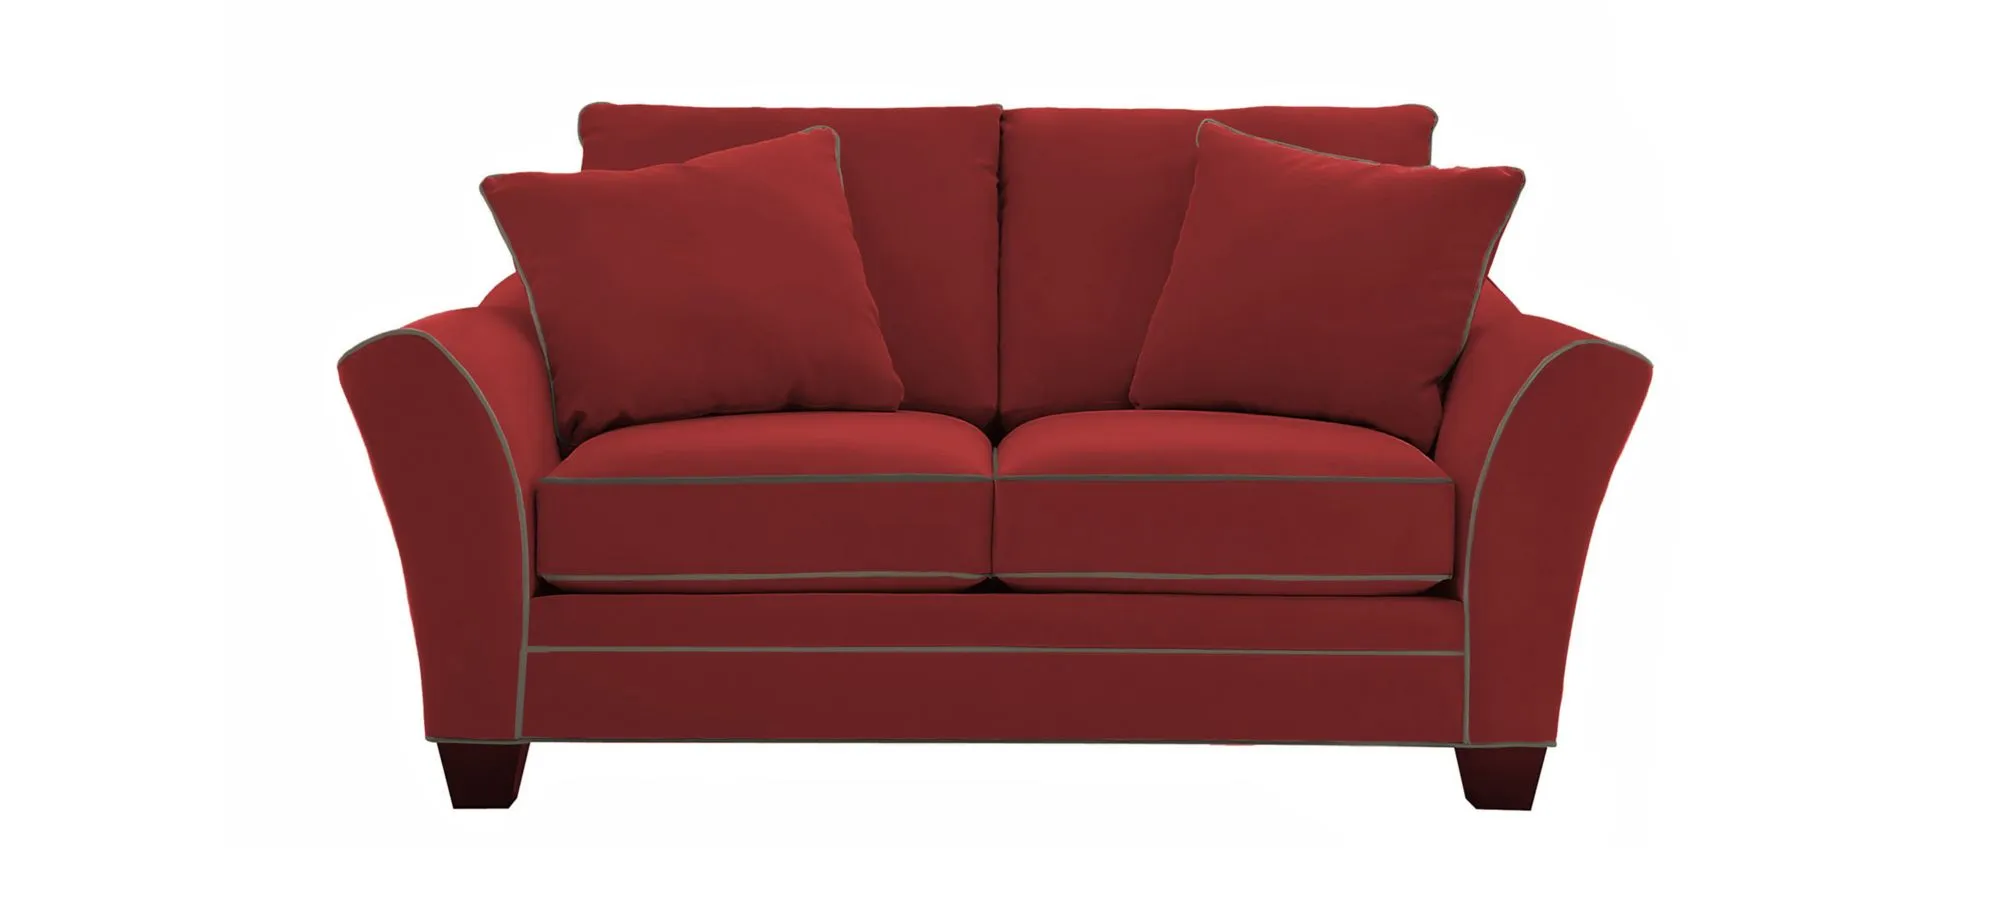 Briarwood Loveseat in Suede So Soft Cardinal/Mineral by H.M. Richards